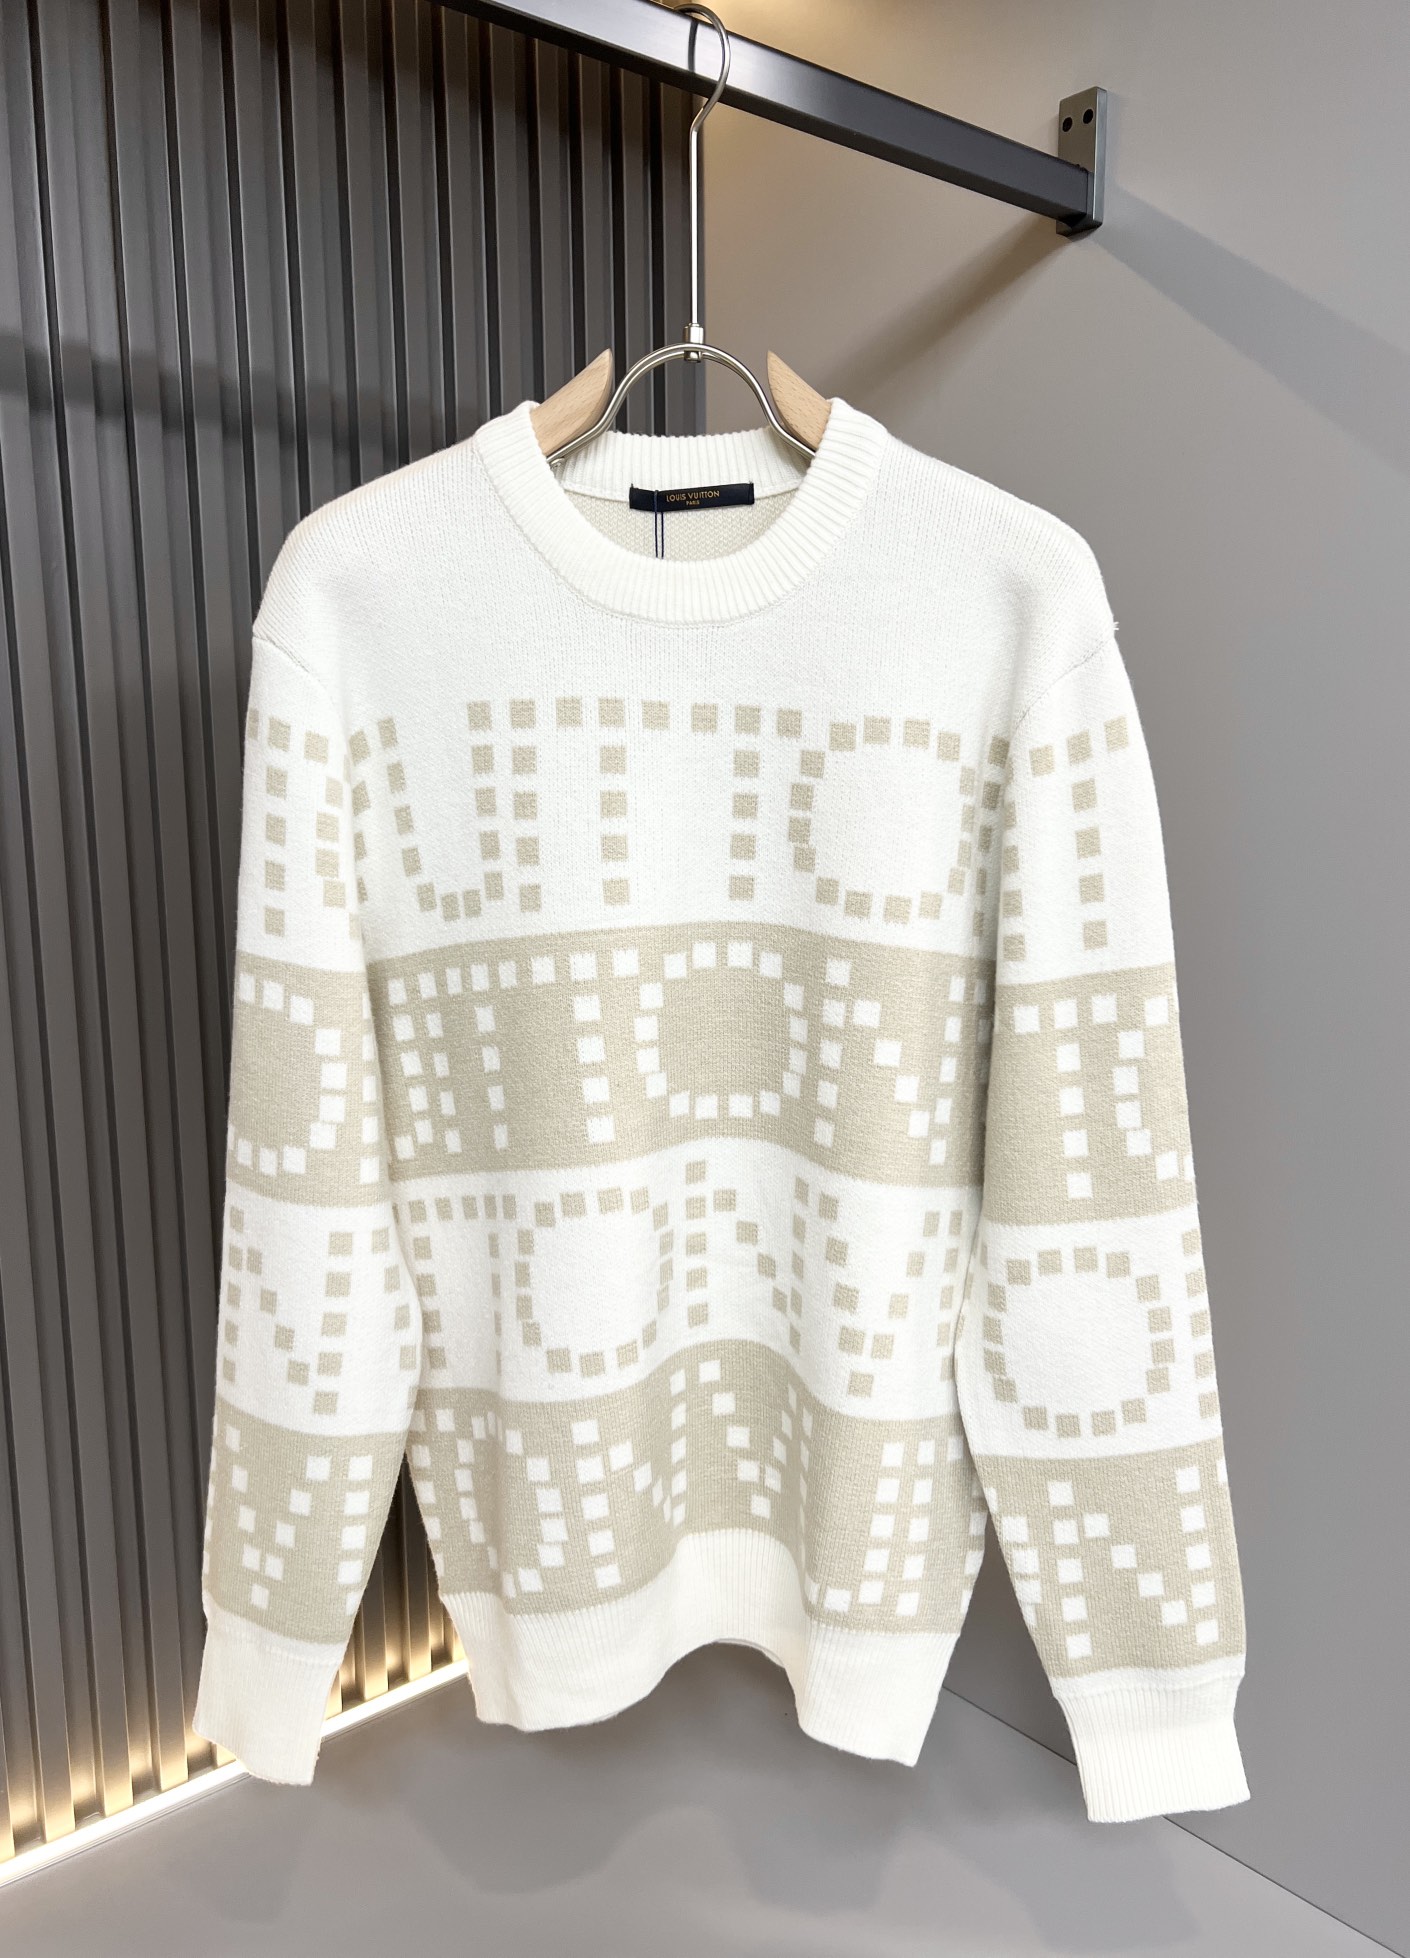 Louis Vuitton Clothing Cardigans Luxury Shop
 Unisex Knitting Wool Fall/Winter Collection Fashion